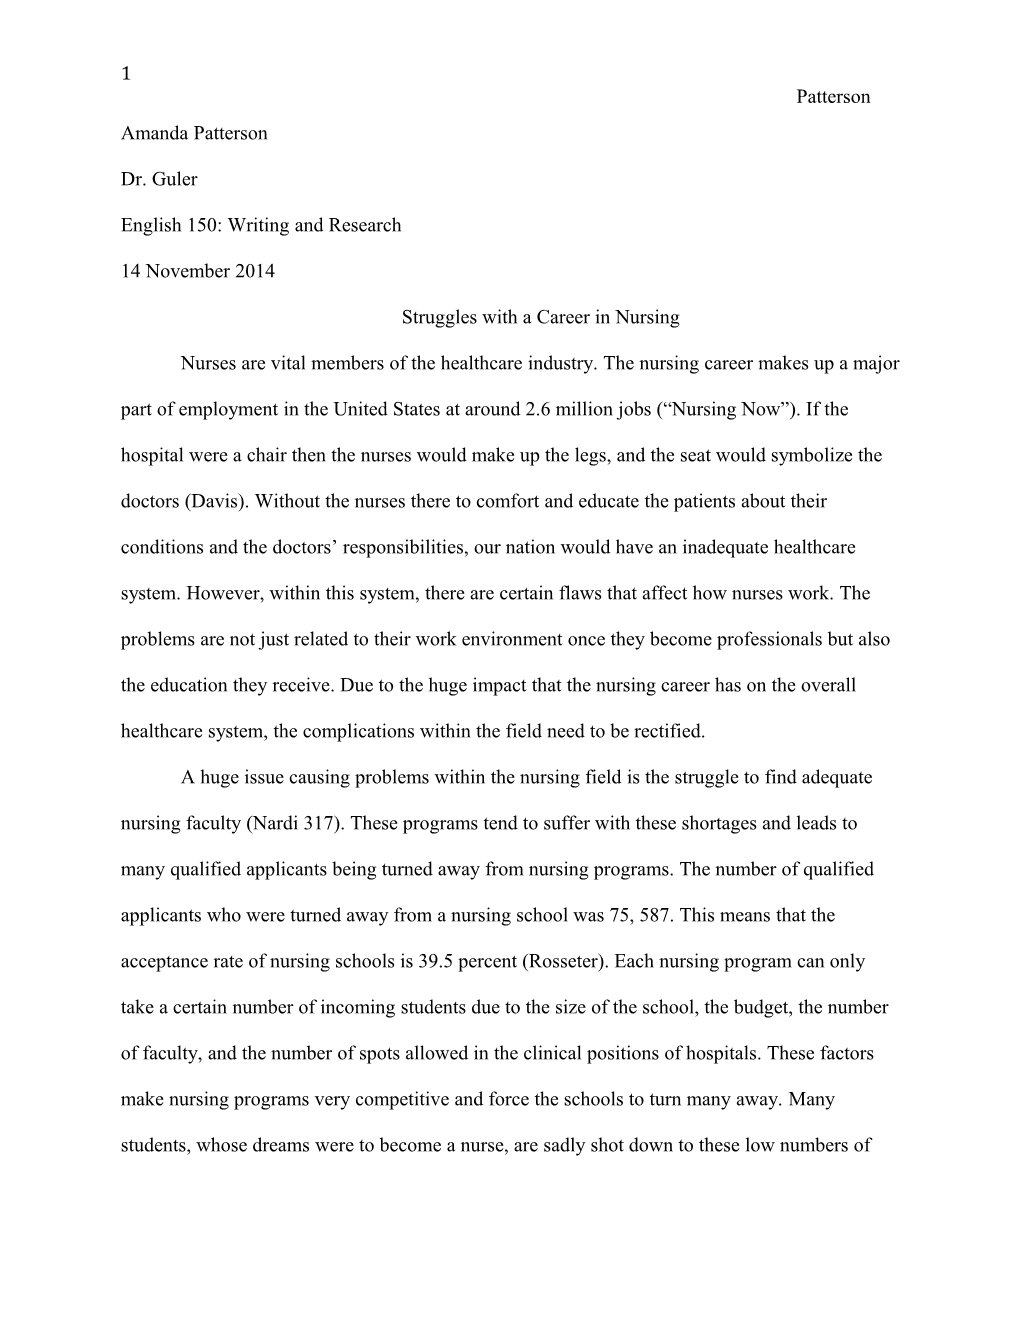 English 150: Writing and Research